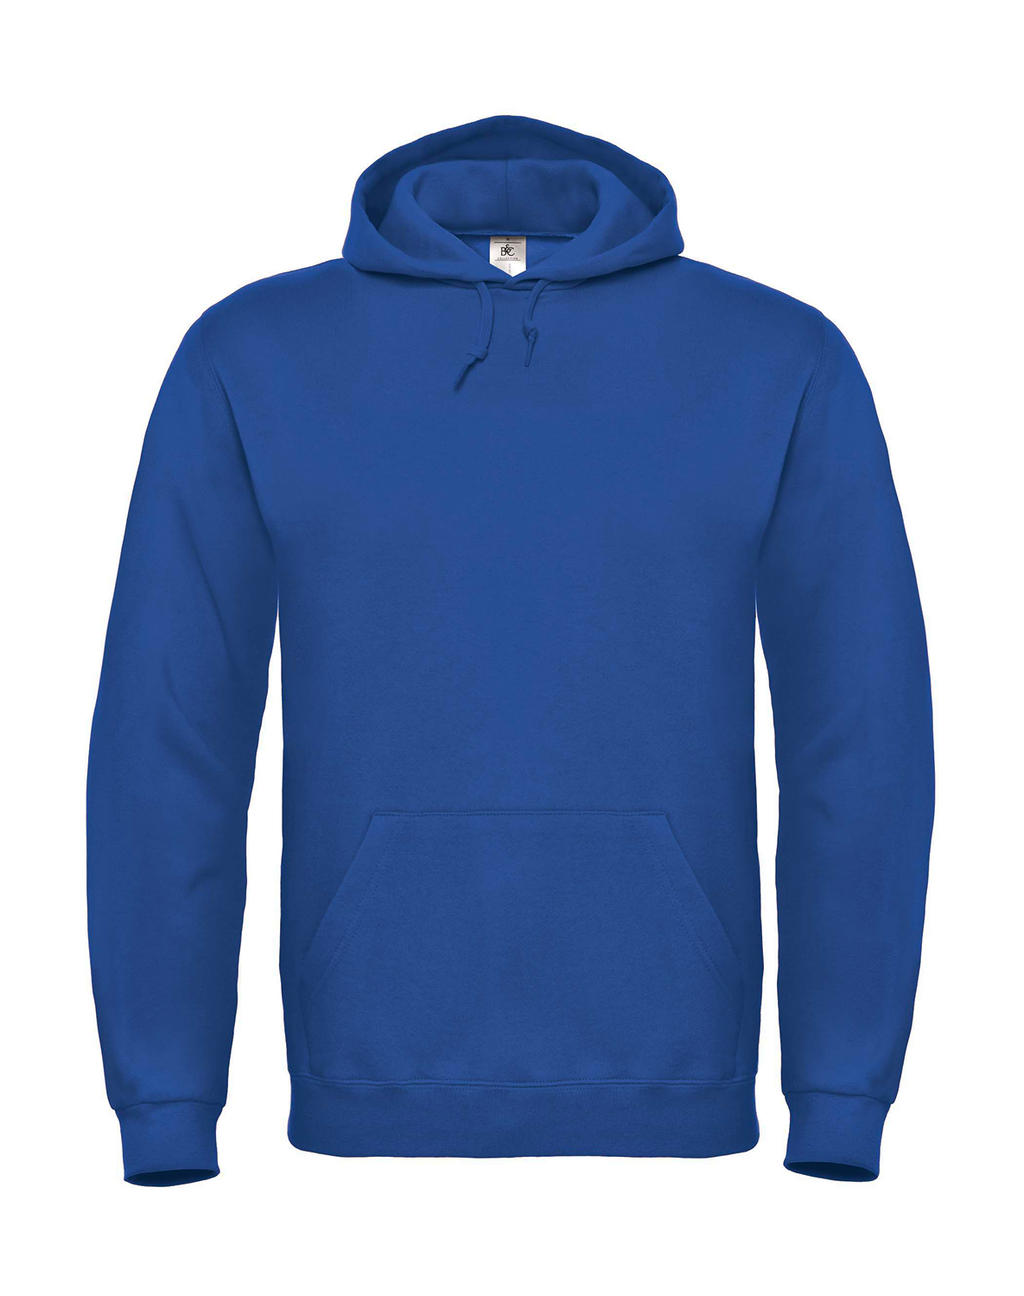  ID.003 Cotton Rich Hooded Sweatshirt in Farbe Royal